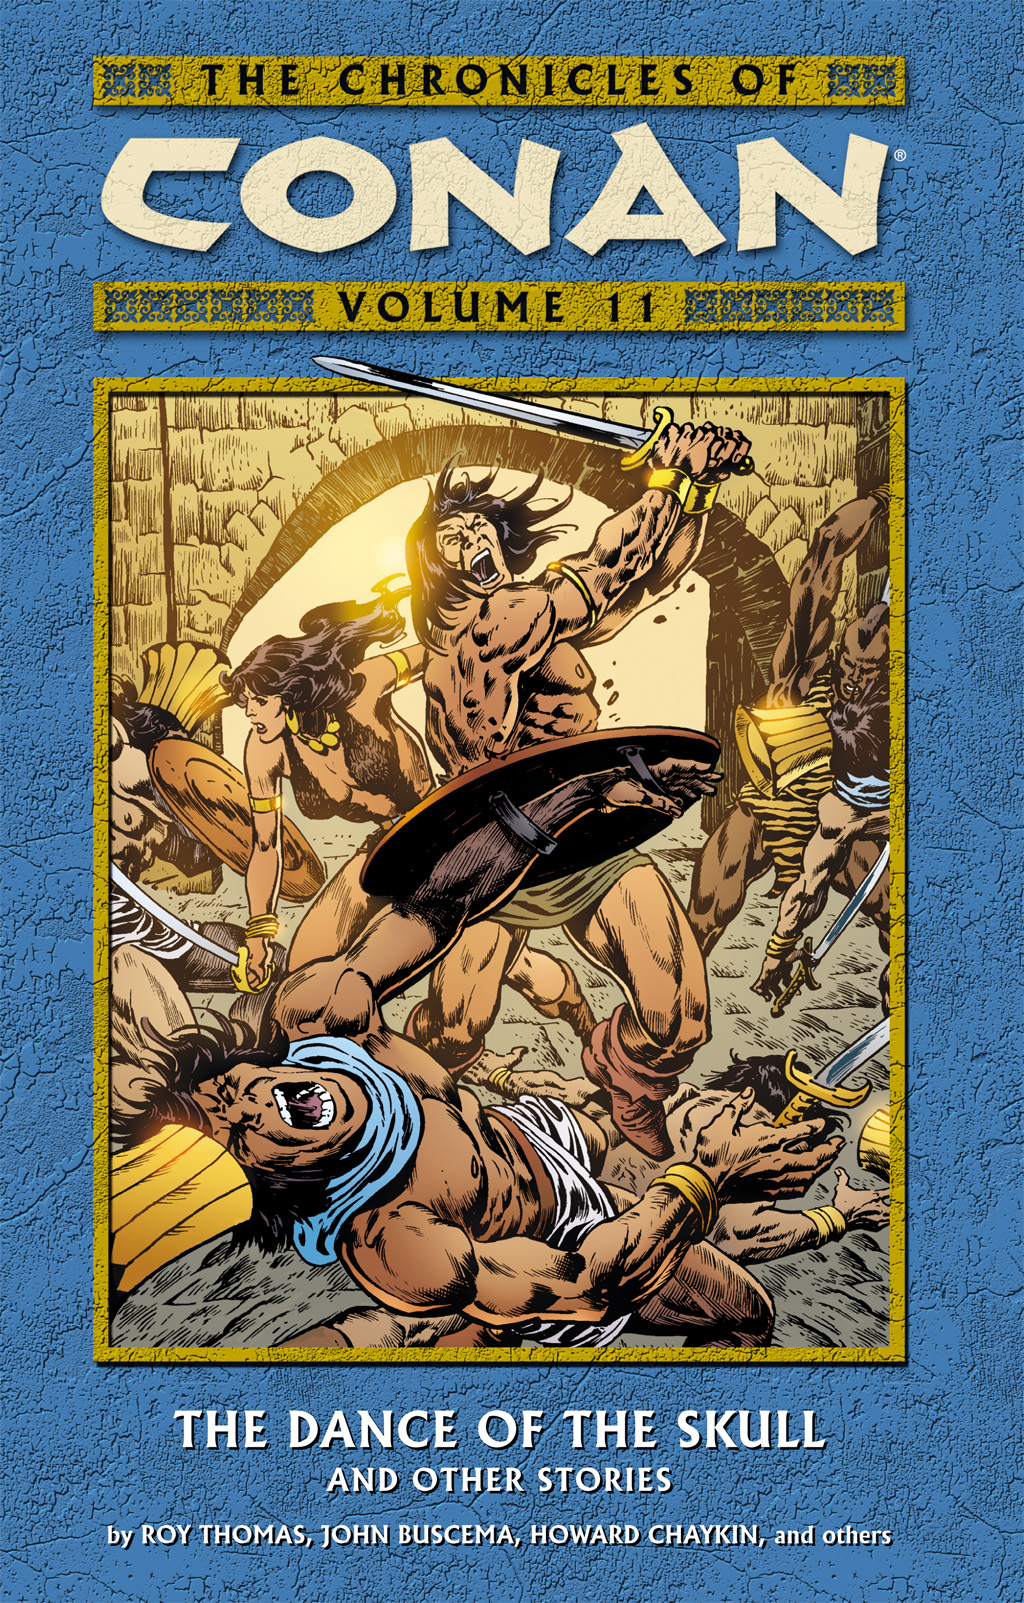 Read online The Chronicles of Conan comic -  Issue # TPB 11 (Part 1) - 1